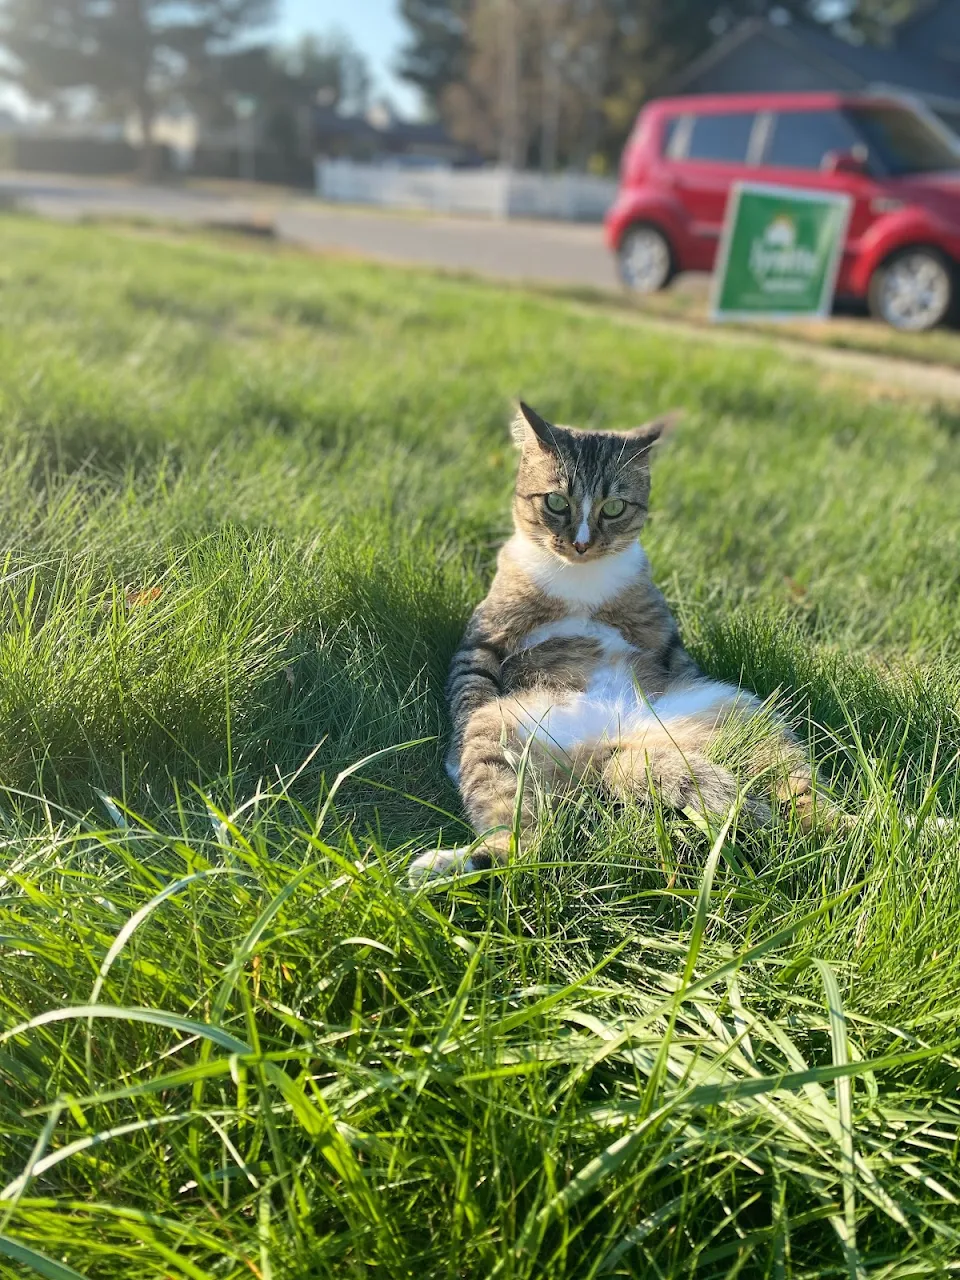 Cat lounging in the grass